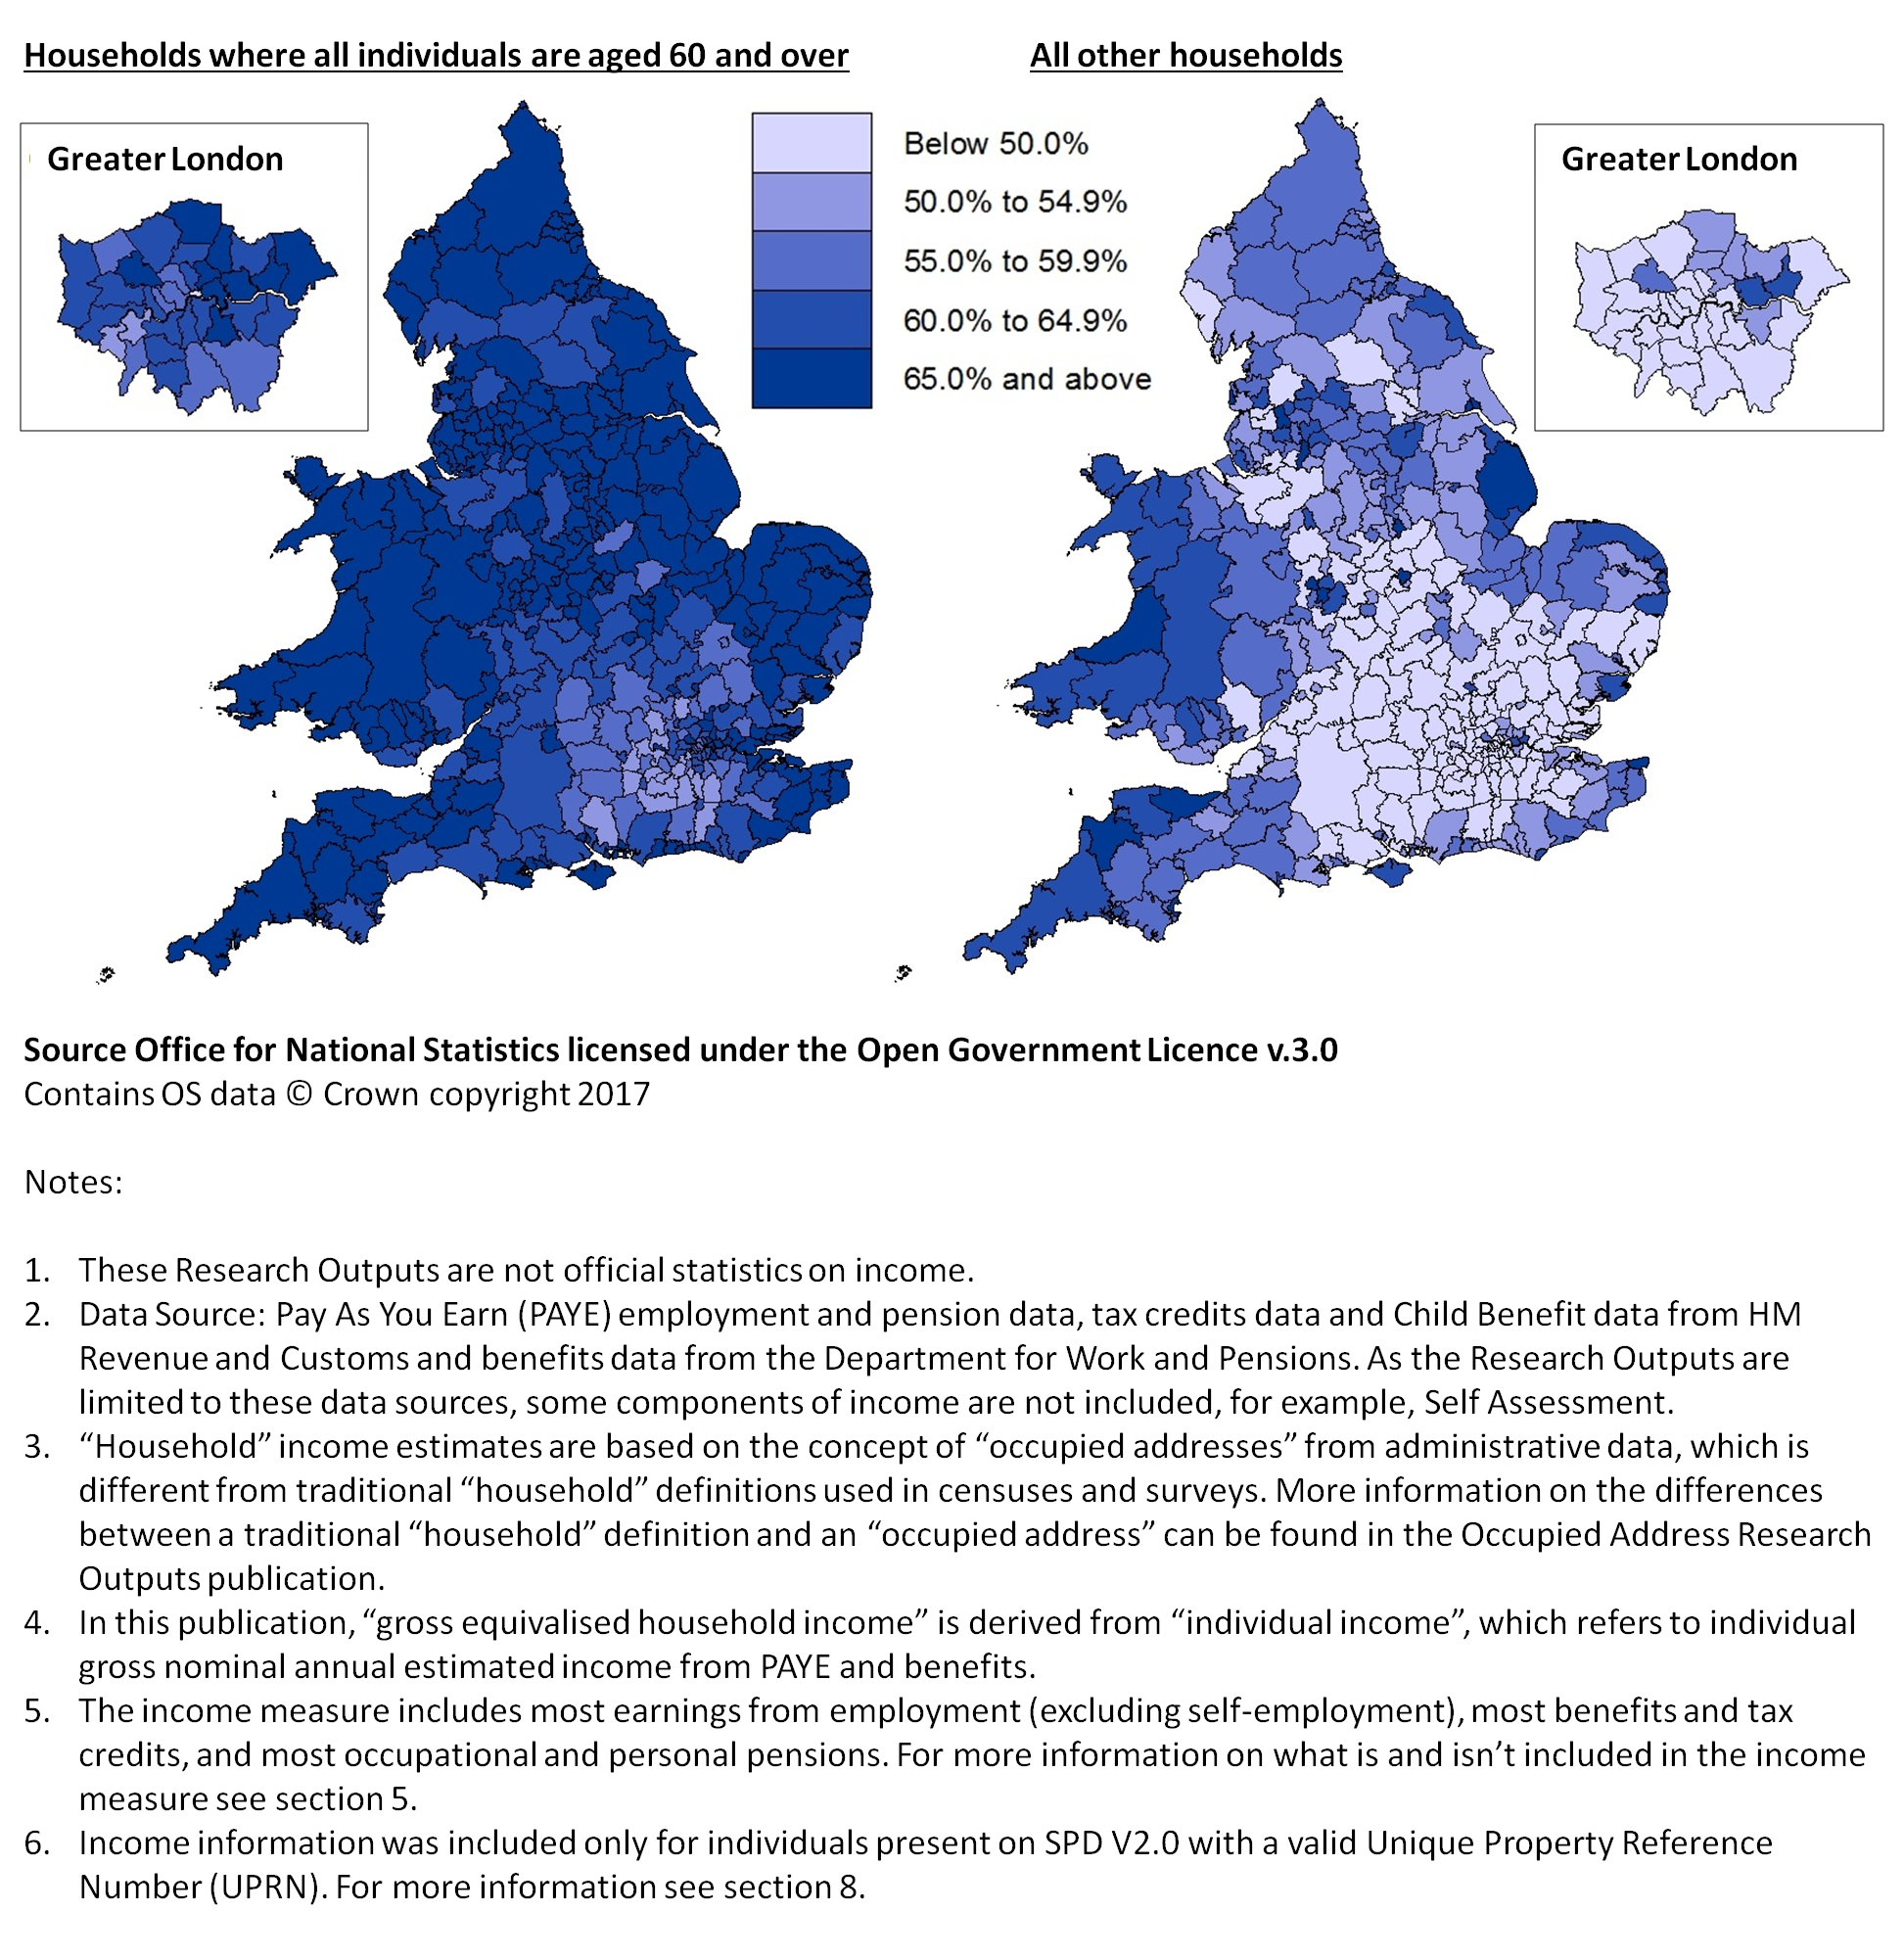 Households with all individuals aged 60 and over have lower incomes in all local authorities.